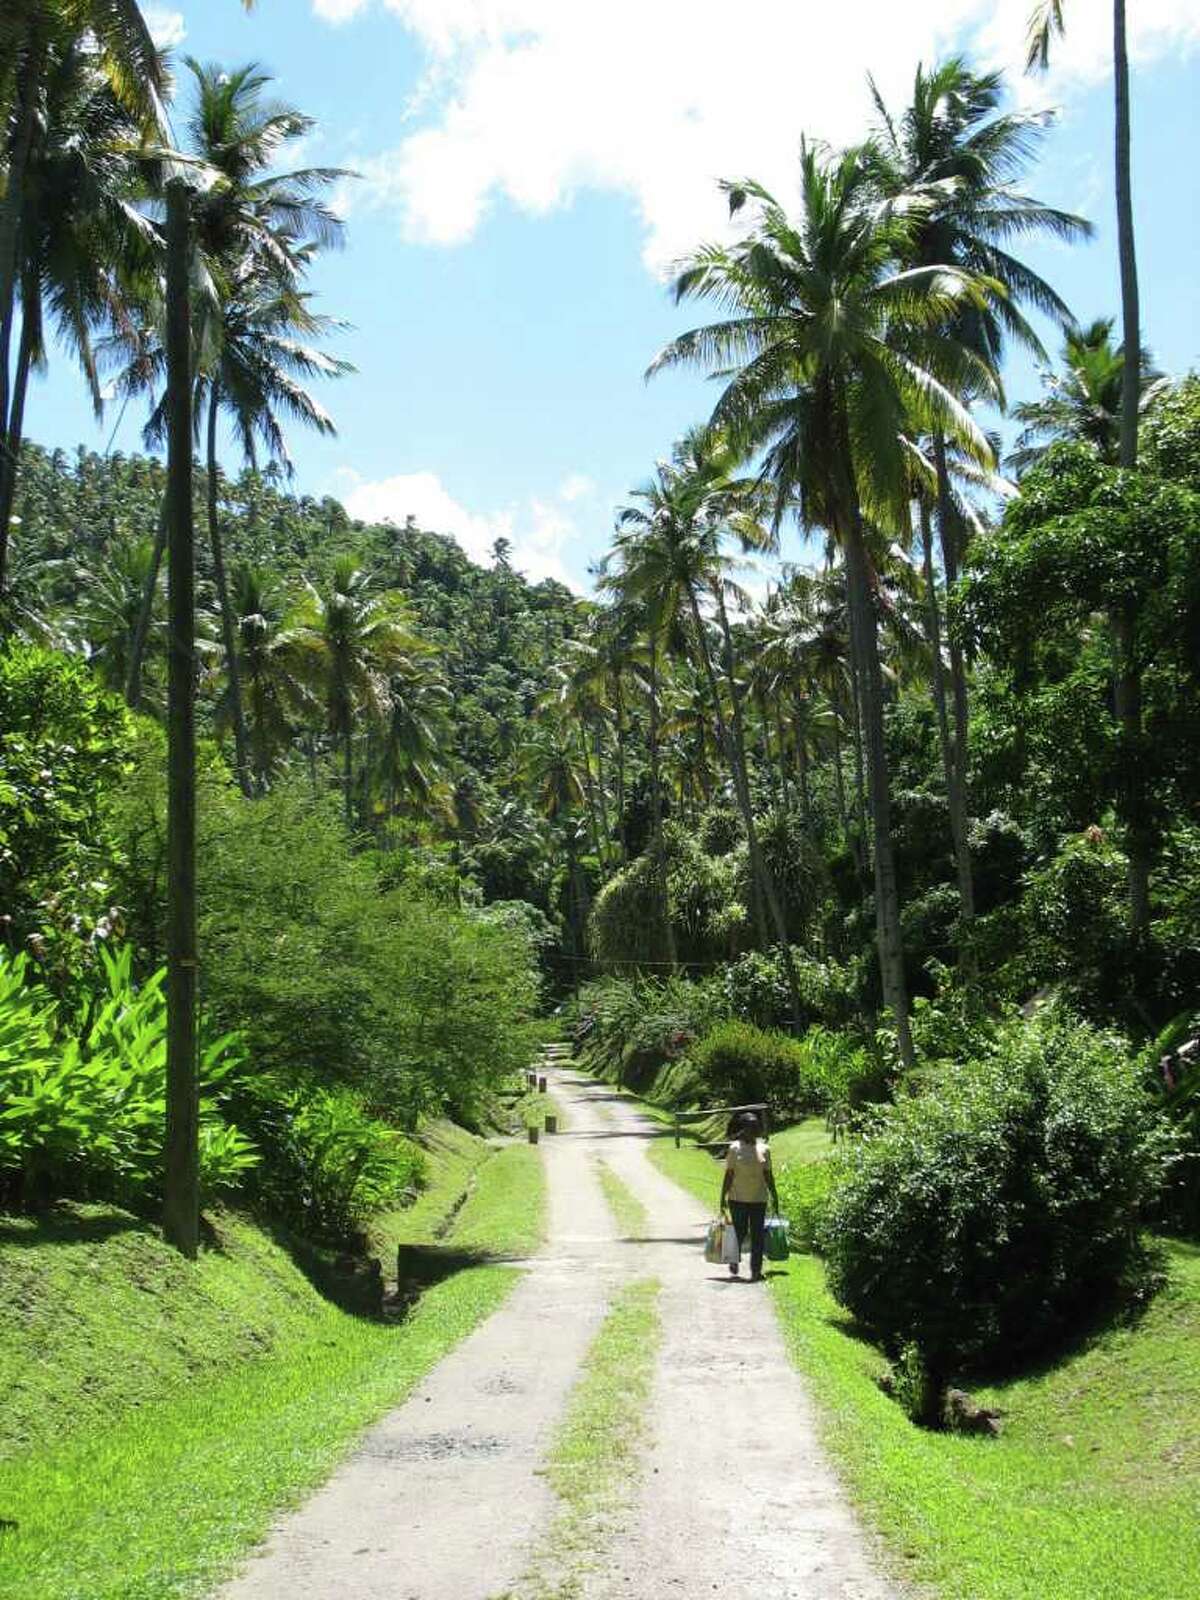 THE TROPICS: Morne Coubaril Estate is a good place to visit to learn about St. Lucia's tropical plants.